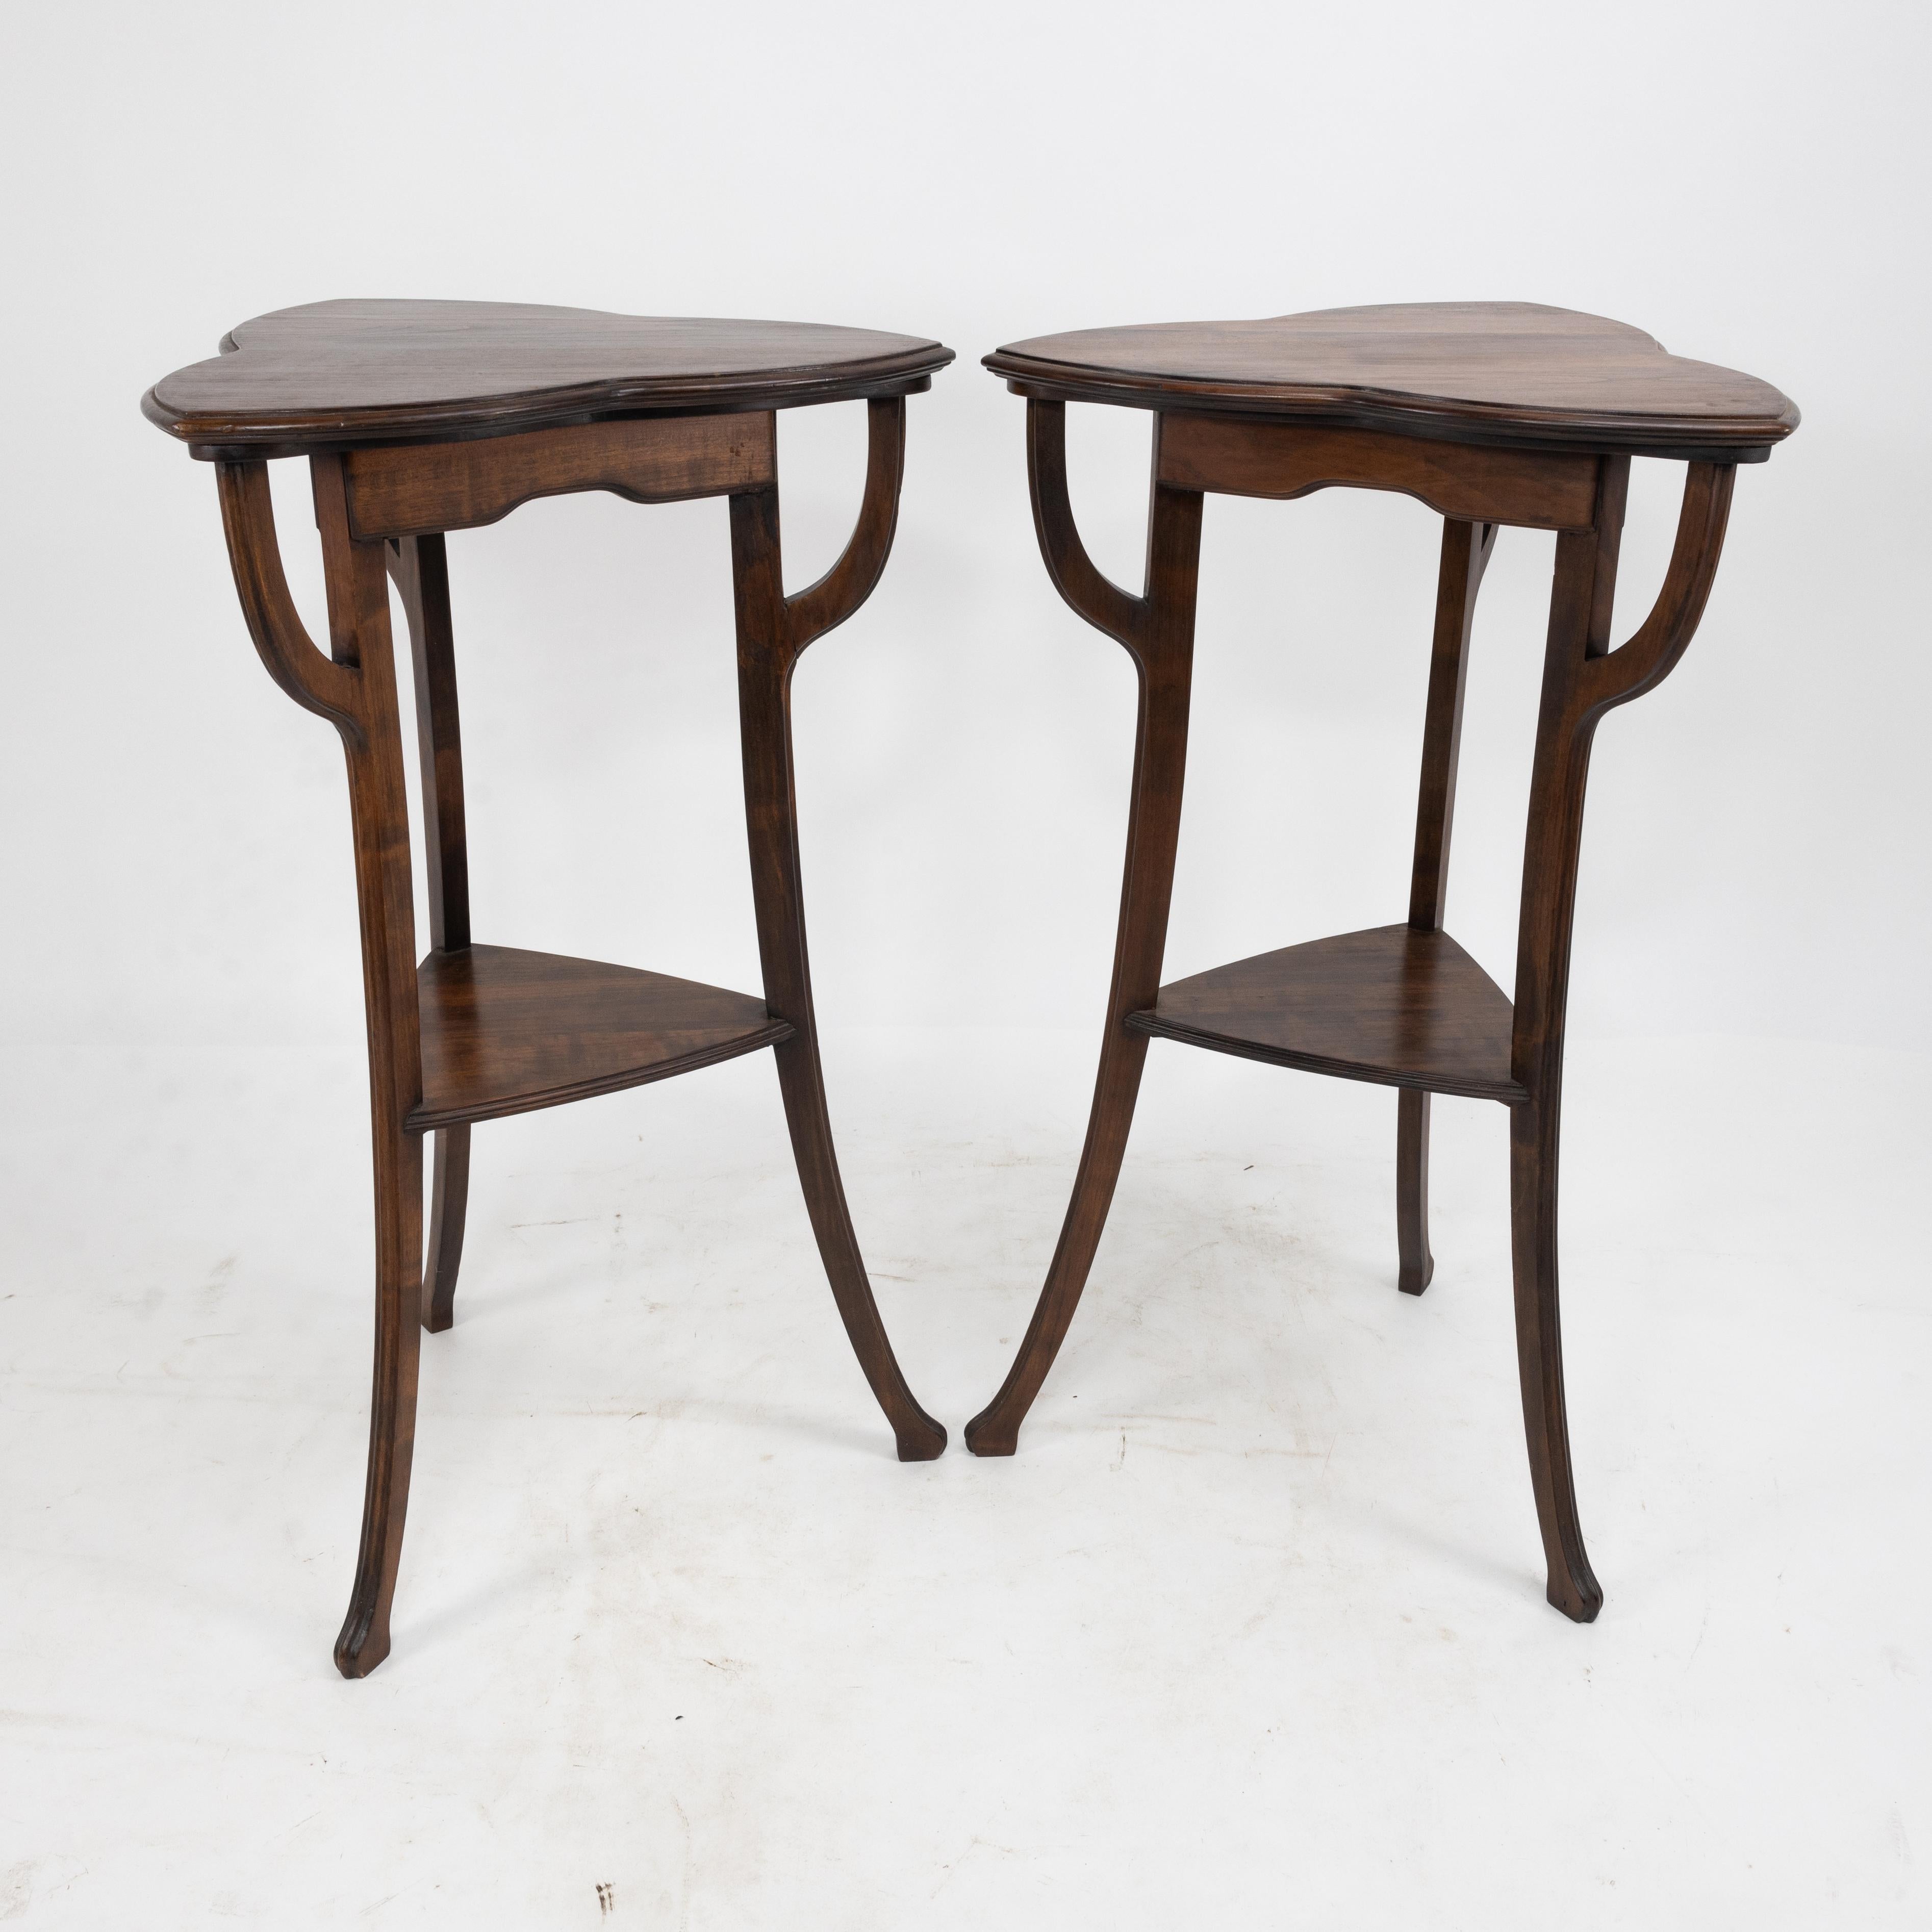 A pair of Art Nouveau beech stained side tables with clover leaf style tops supported with whiplash uprights beside shaped aprons, flowing with elegant legs finishing on little pad feet, united by a lower triangular shelf, with subtle astragal